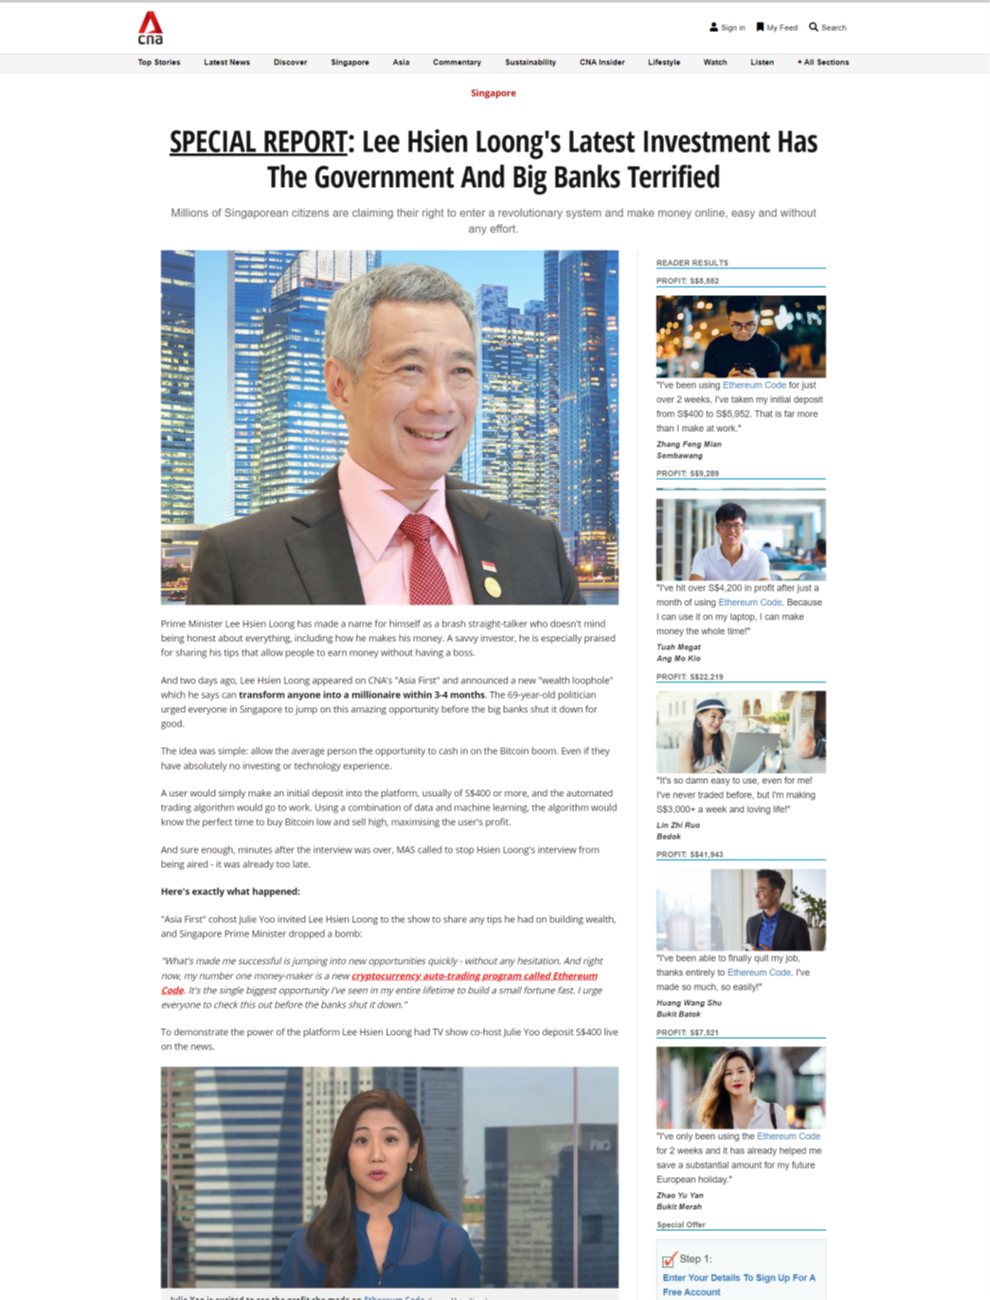 20220430_police_advisory_on_fake_news_articles_masquerading_as_pm_lee_hsien_loong_1